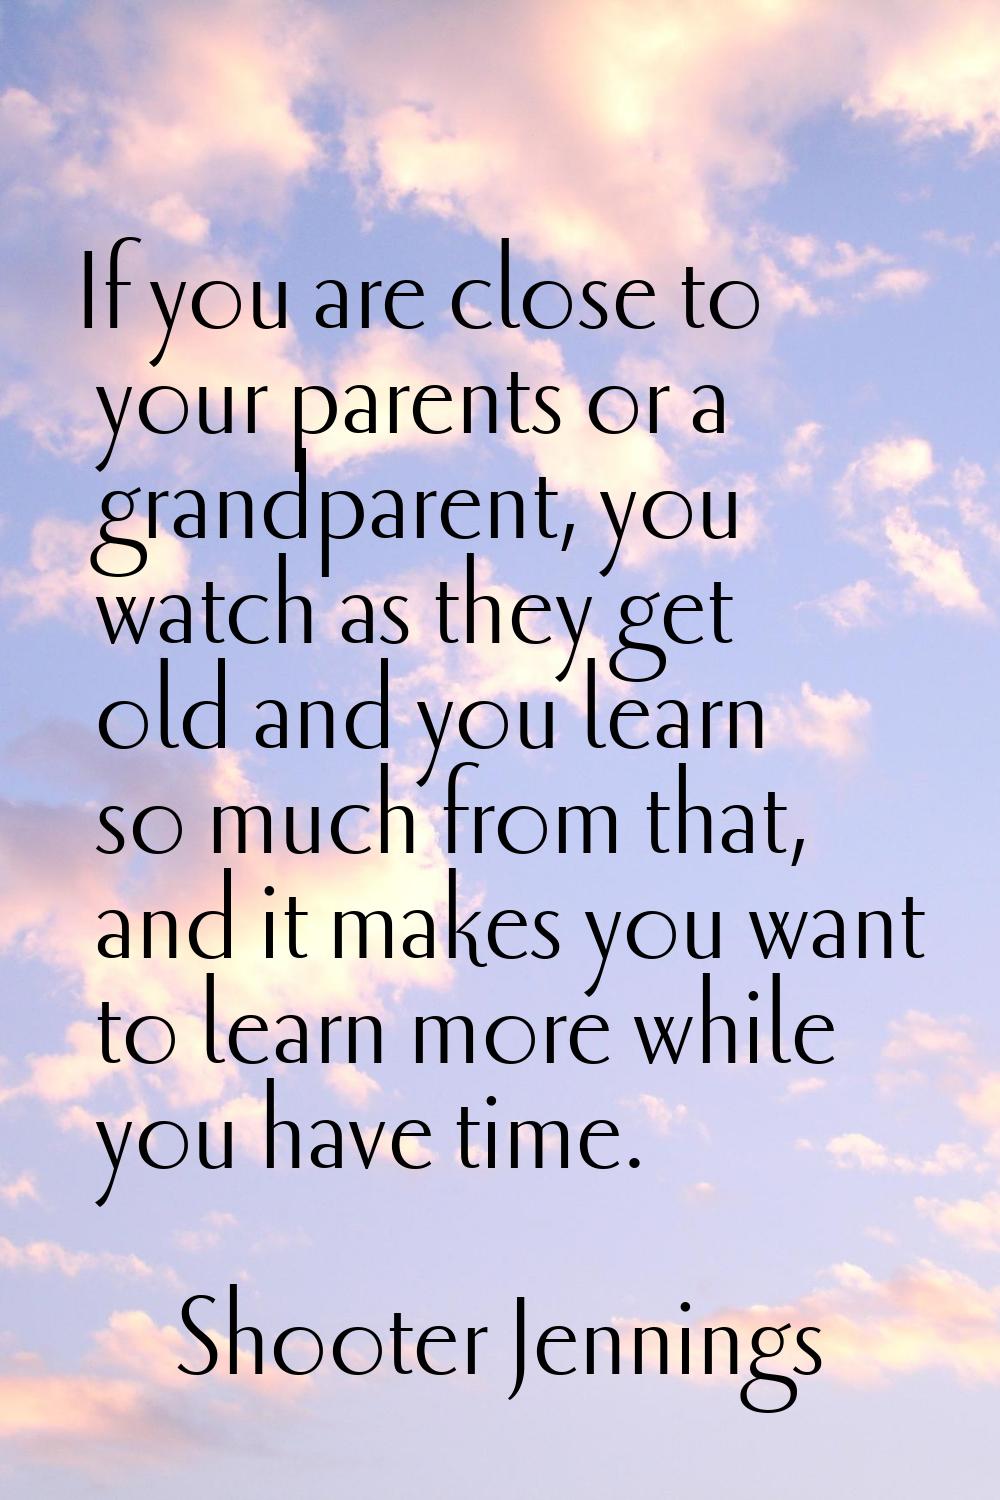 If you are close to your parents or a grandparent, you watch as they get old and you learn so much 